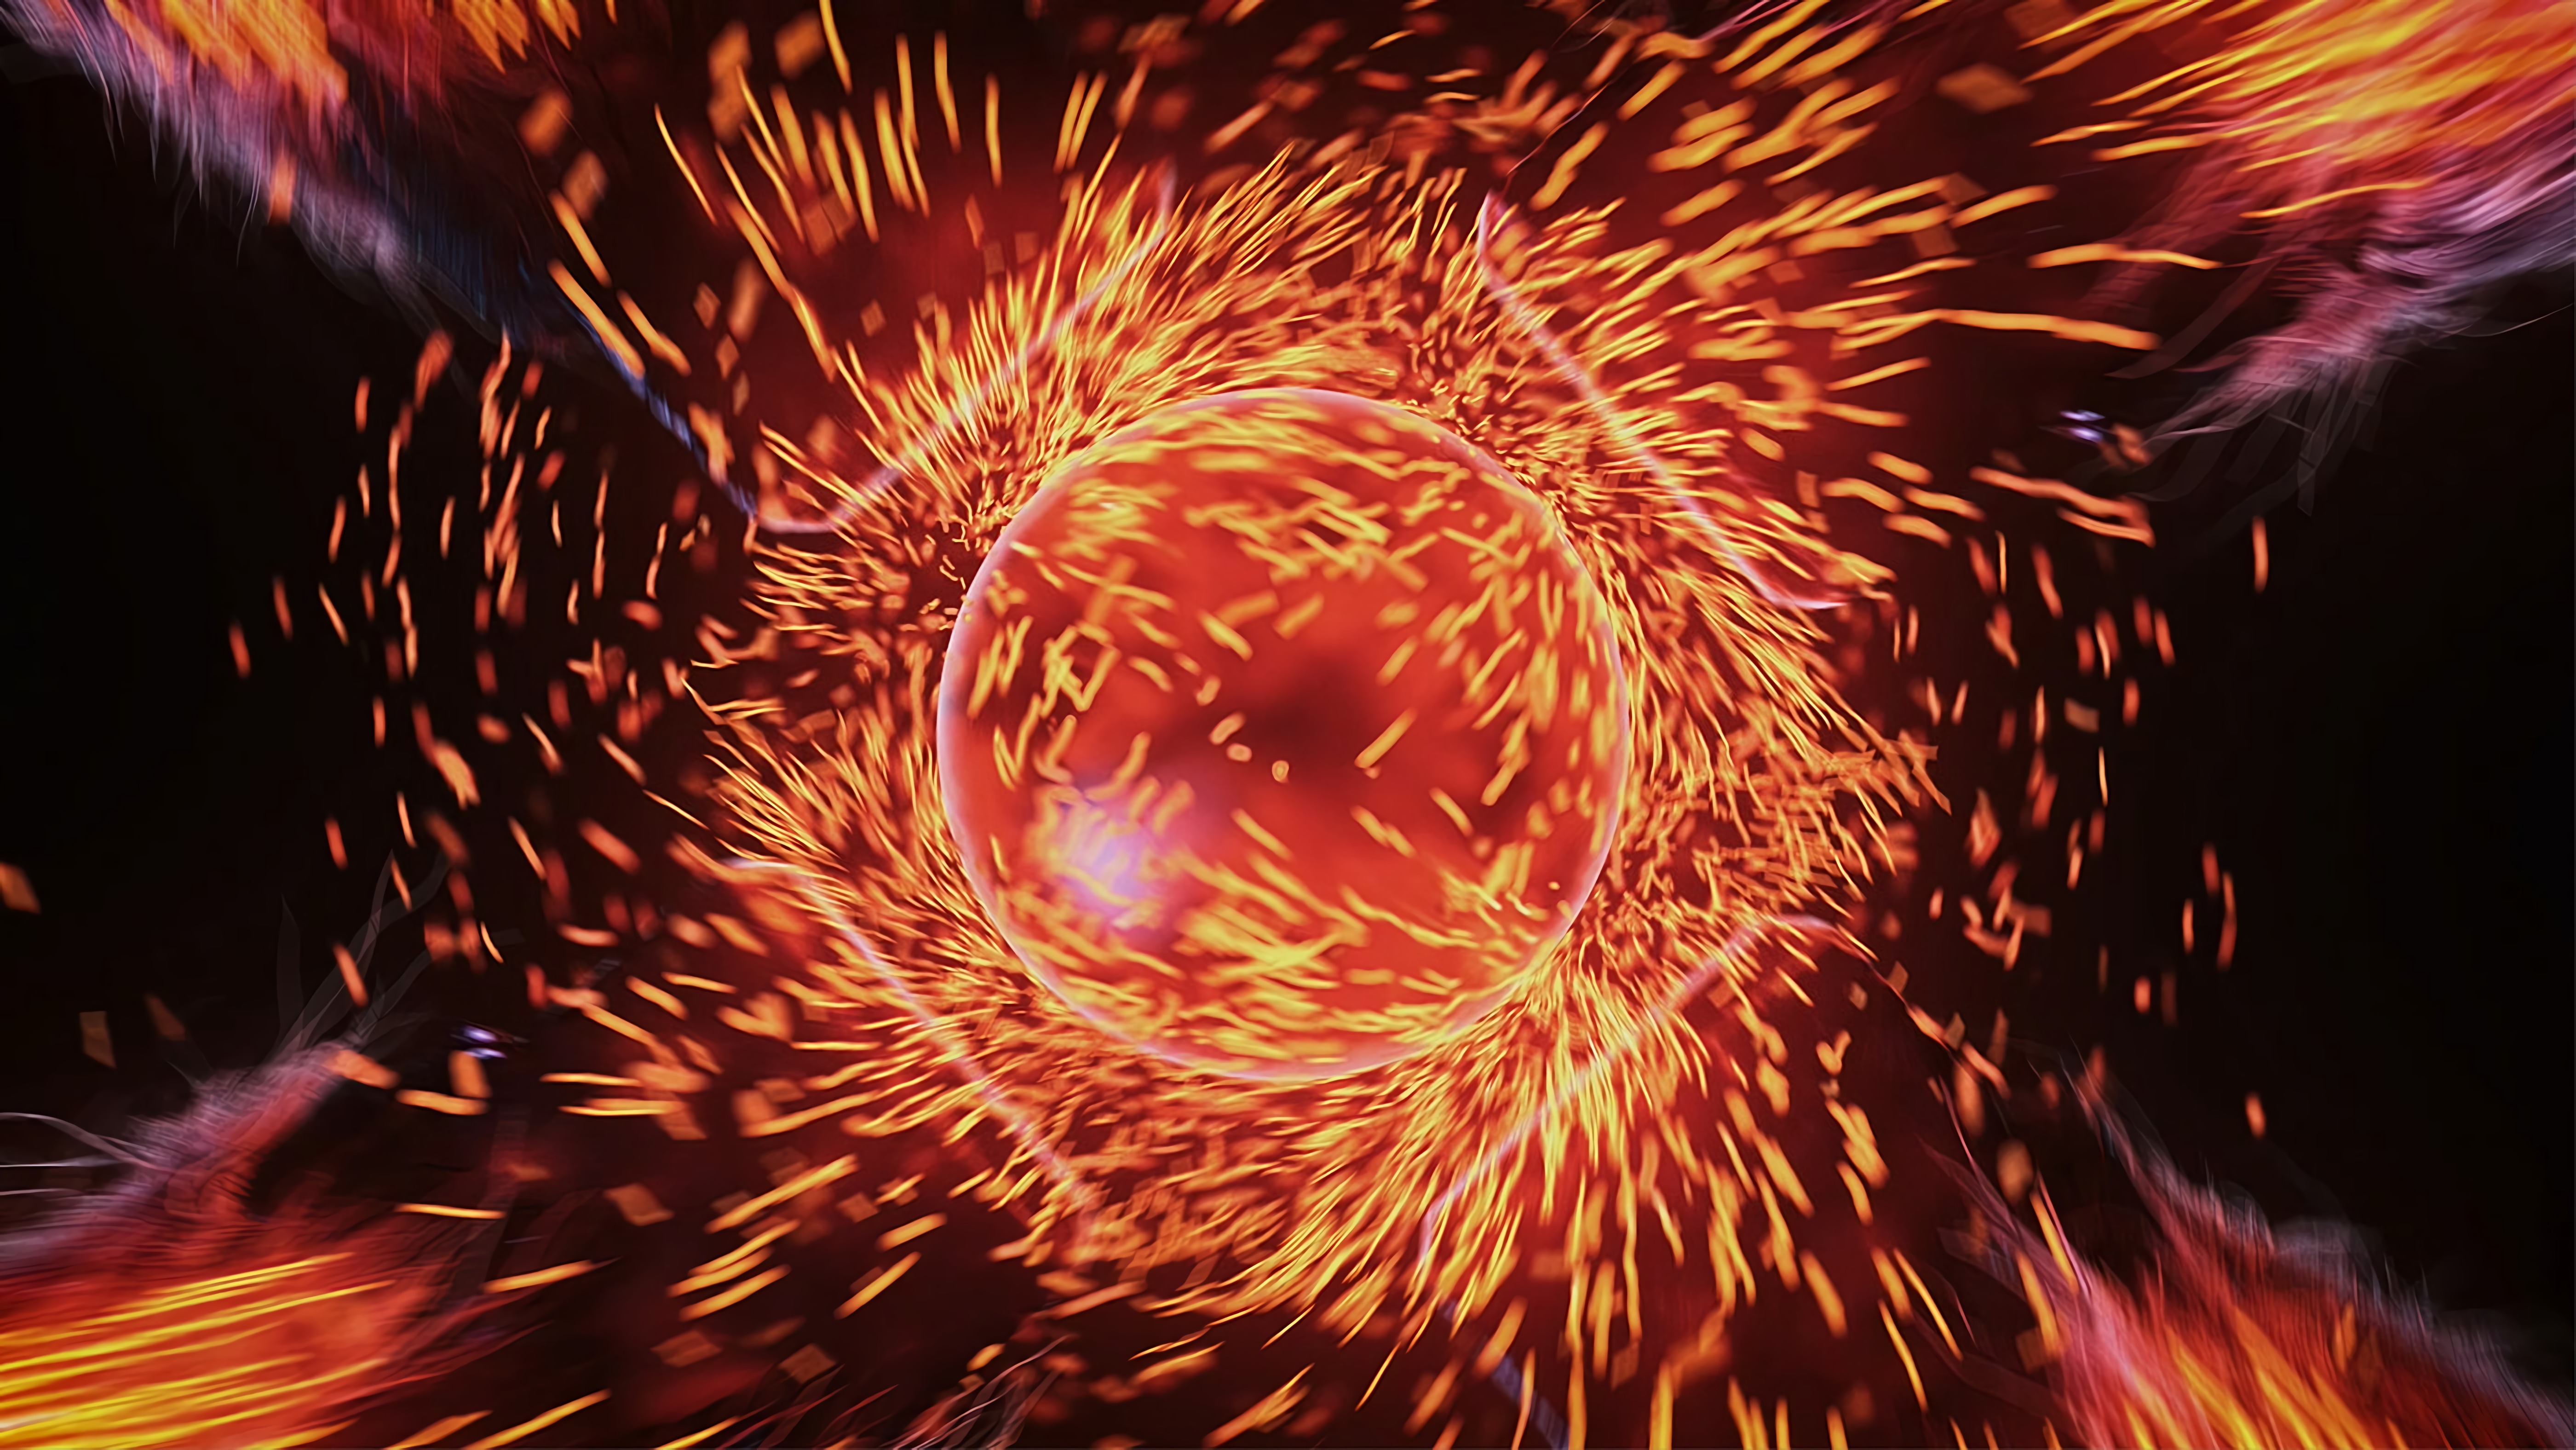 abstract, bright, sparks, ball, flaming, fiery 2160p